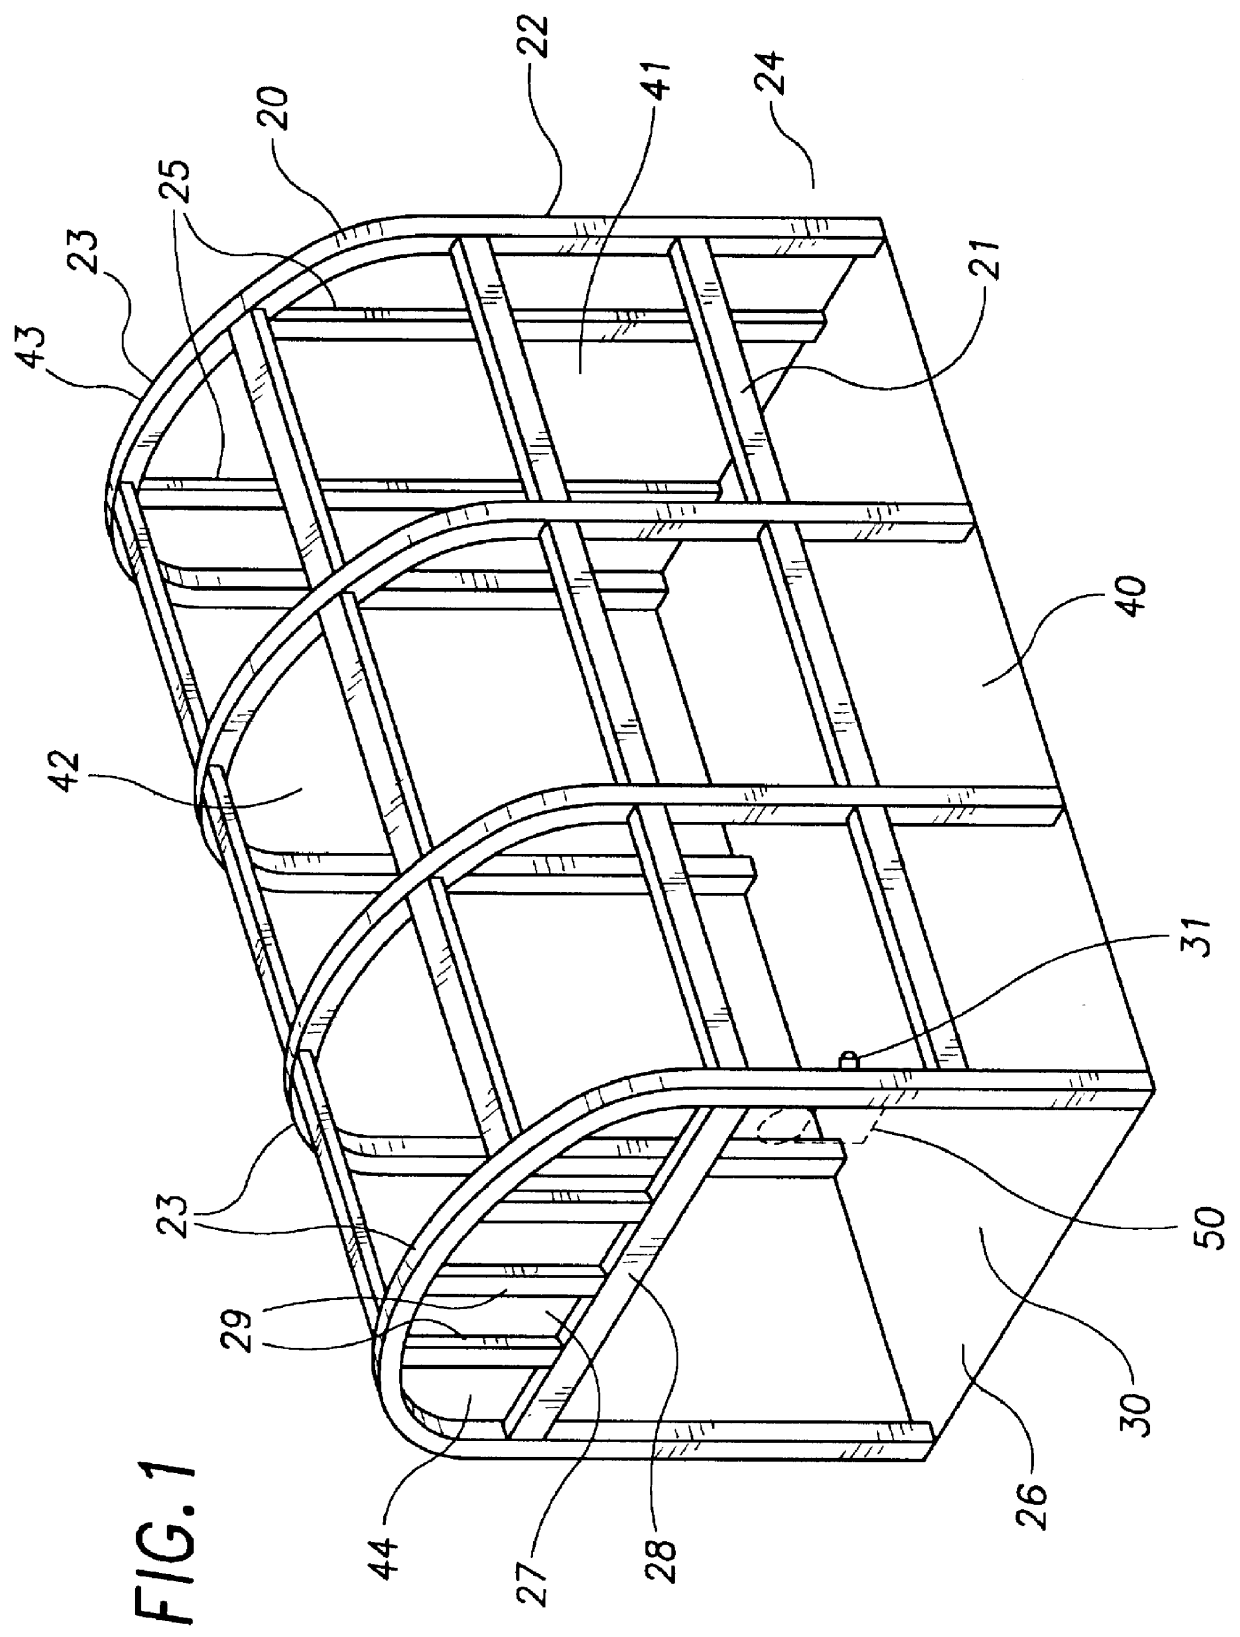 Inflatable structure with sealable compartment therein